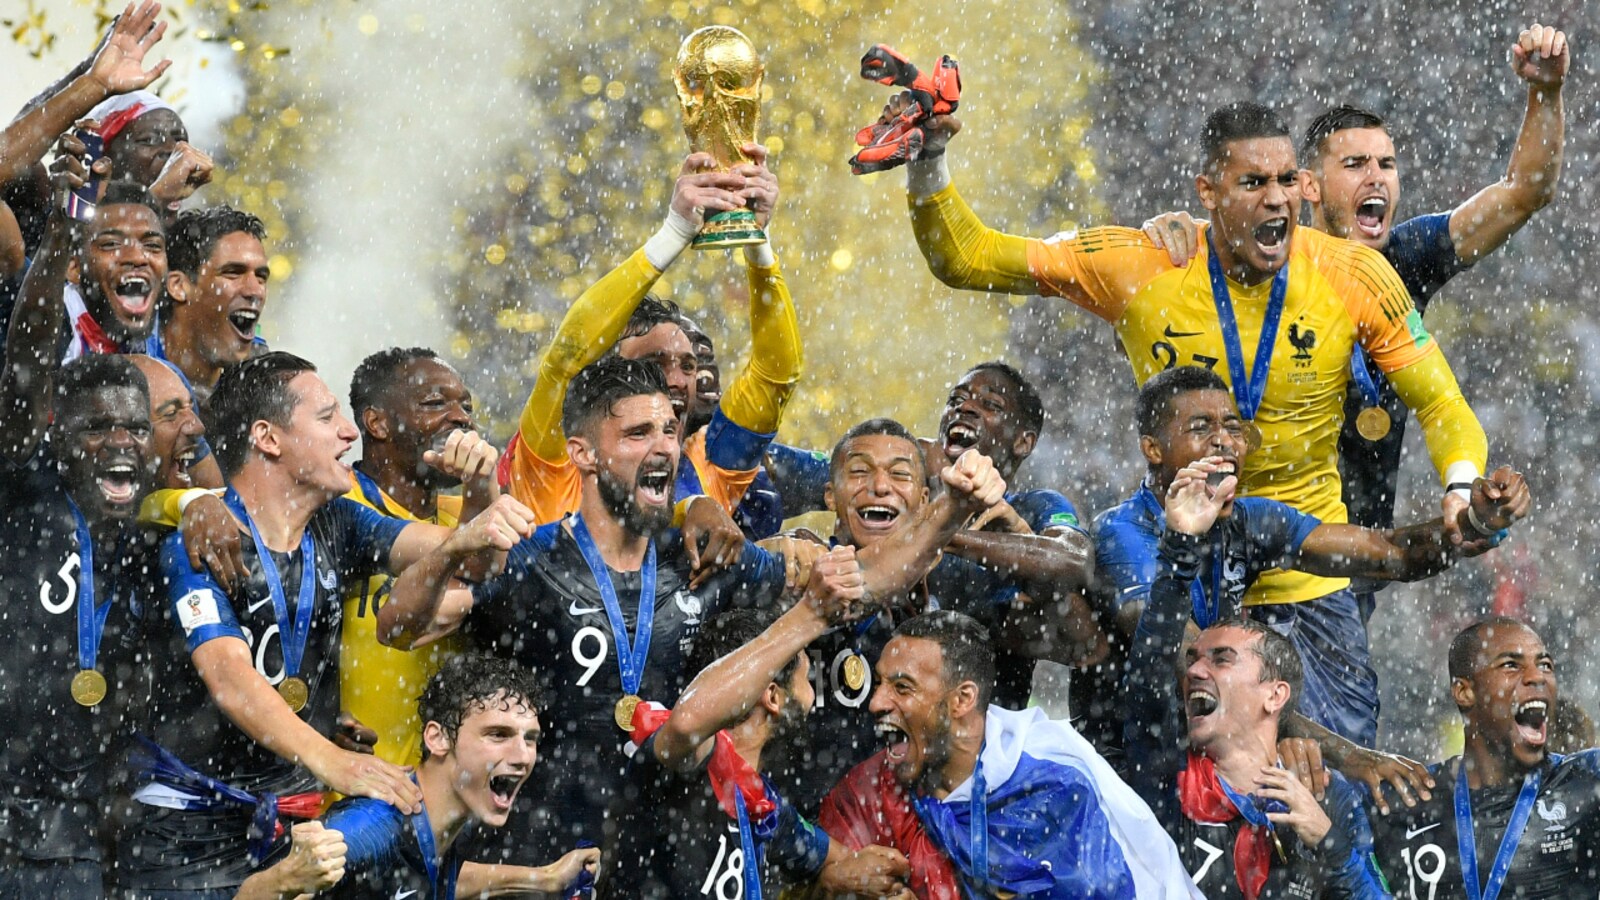 Clash of champions: Today in history: Brazil hold France in FIFA